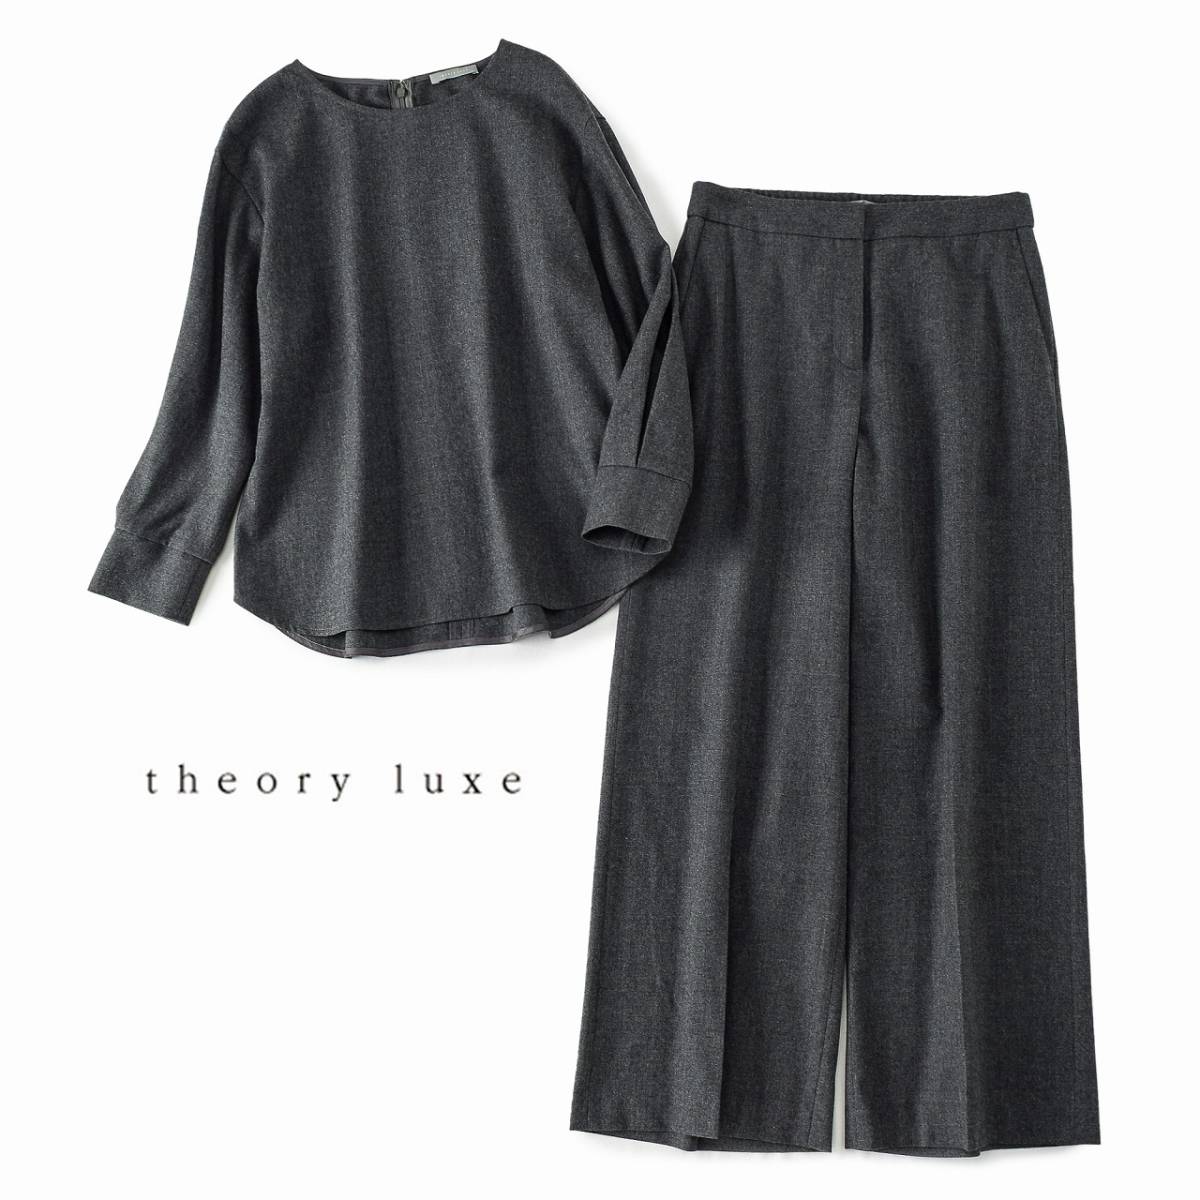 theory luxe パンツスーツセットアップ-